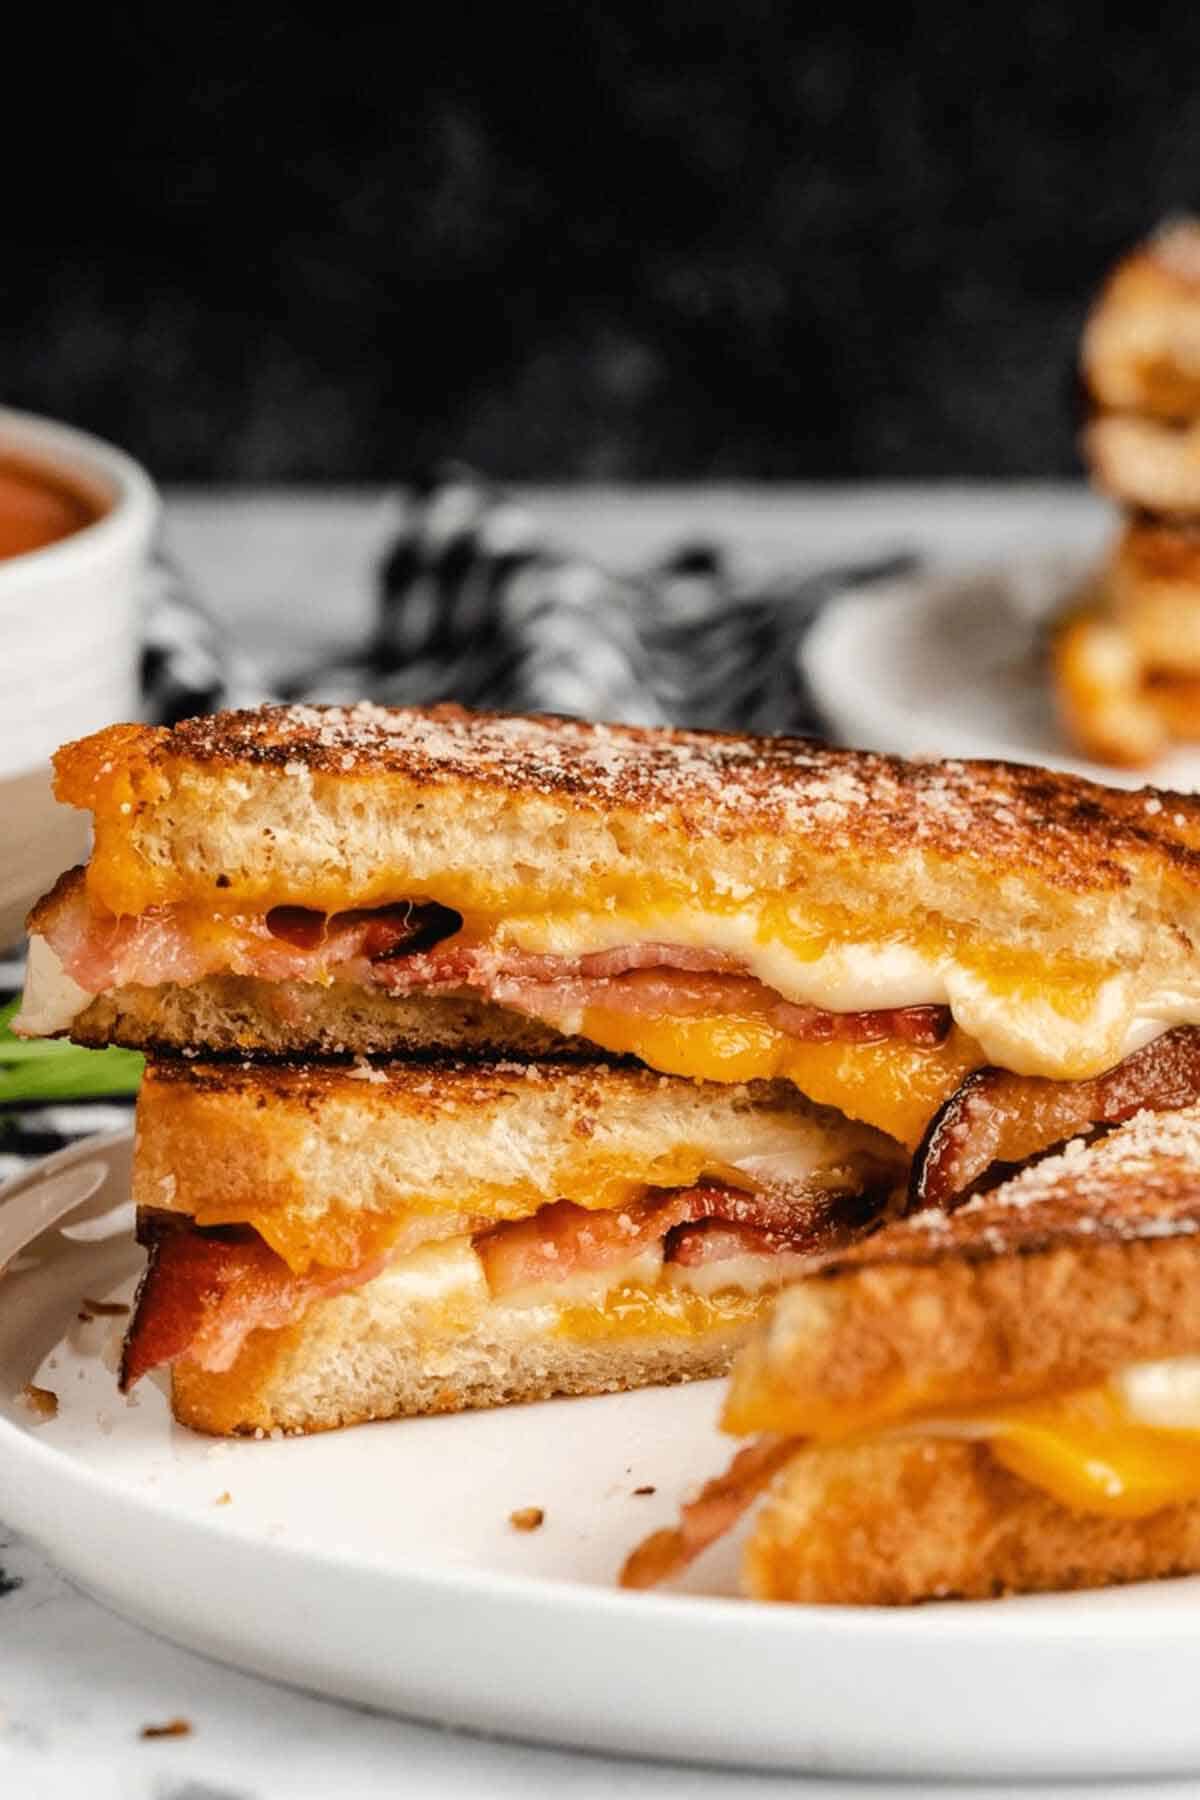 A golden brown, crispy bacon grilled cheese sandwich.